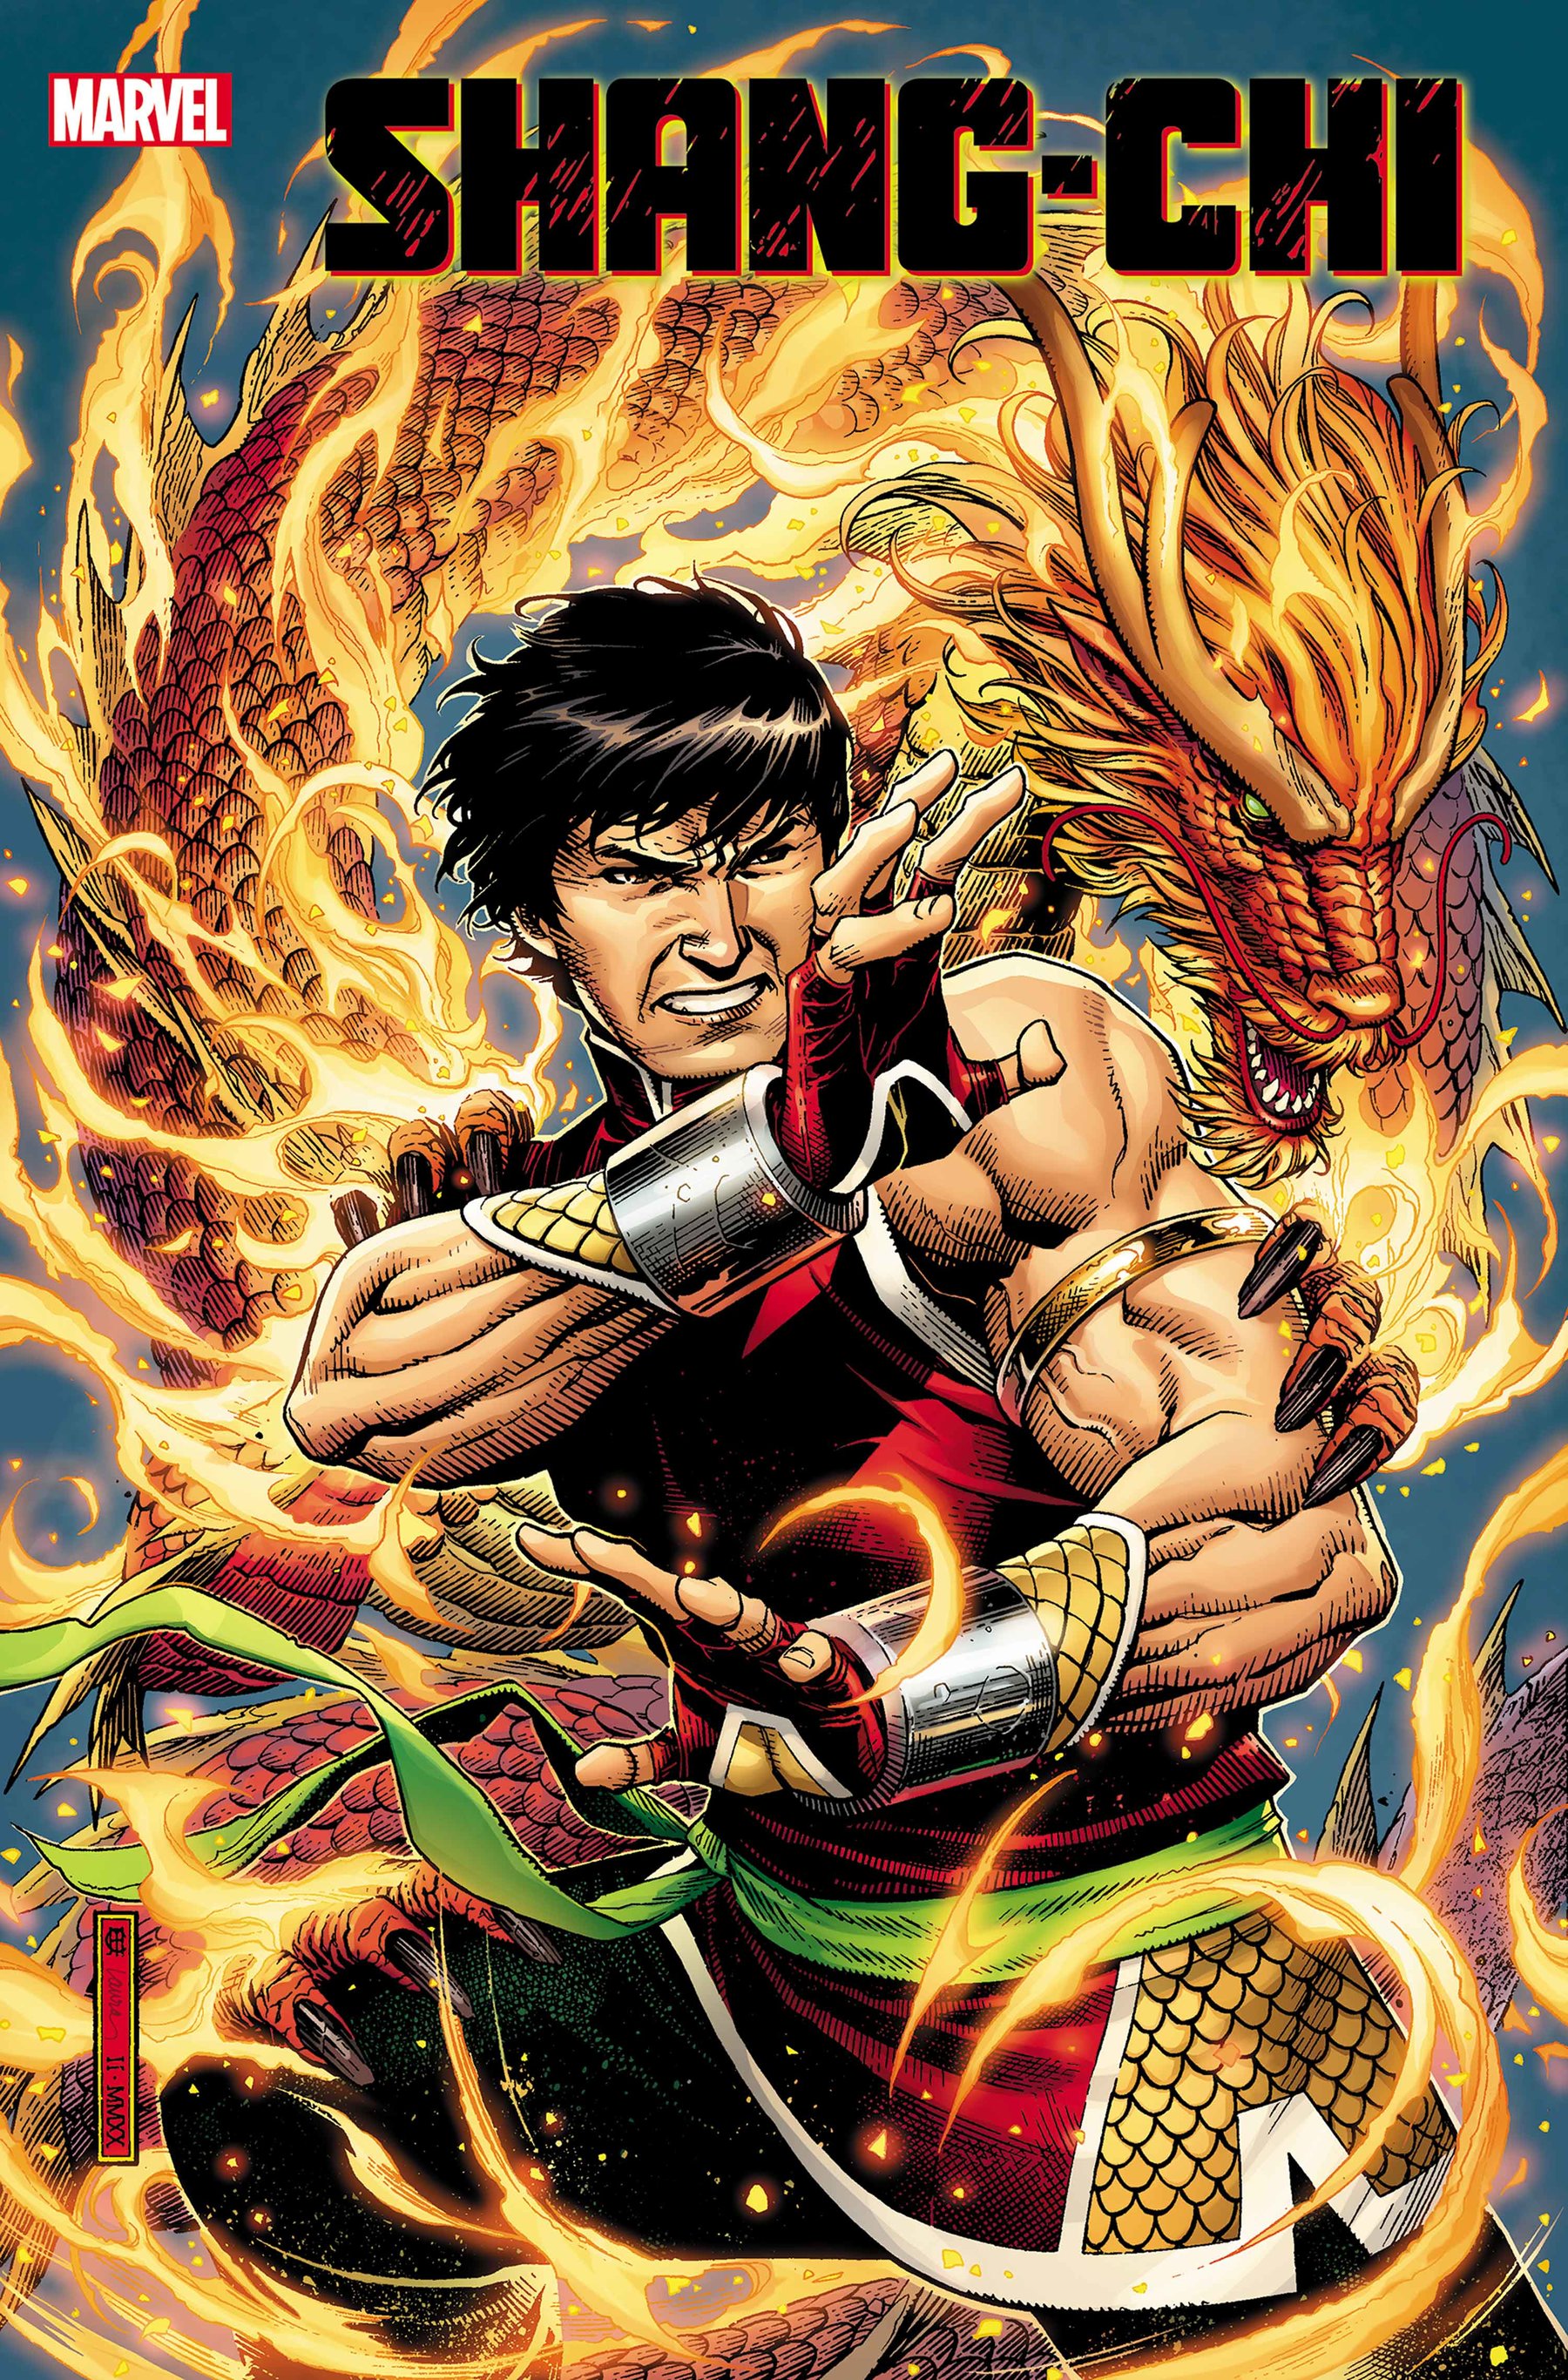 A Shang Chi Comic For Summer, Ahead Of The Hero's Marvel Film